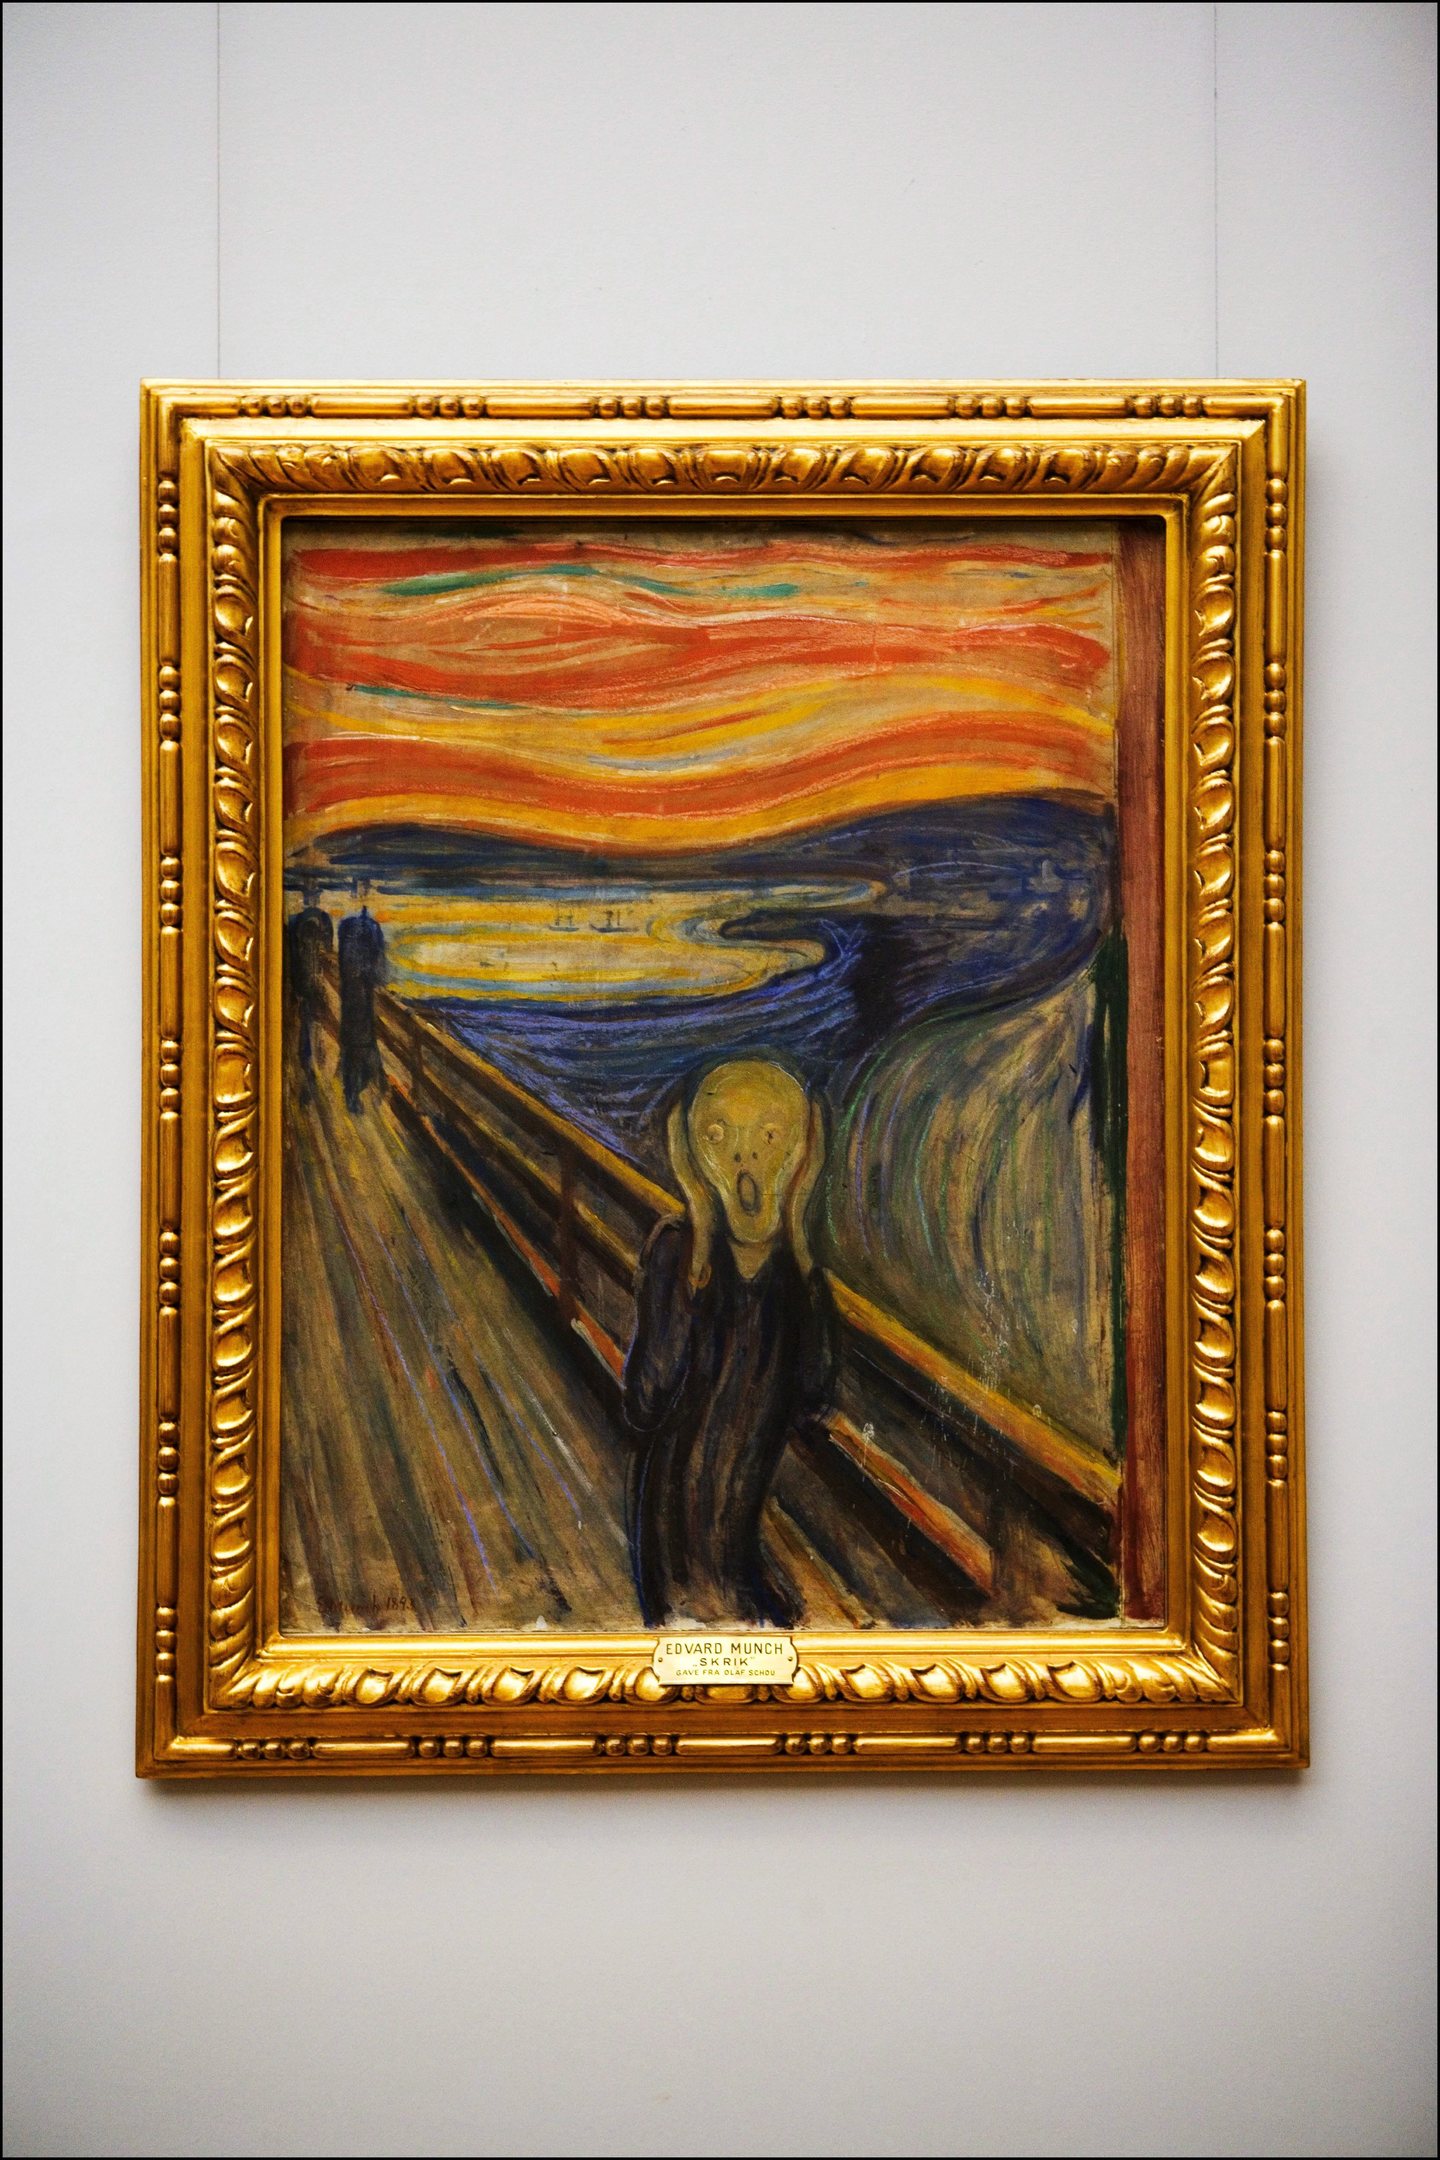 The Cry by Munch, Fine Art museum in Oslo, Norway (Maurice Rougemont/Gamma-Rapho via Getty Images)